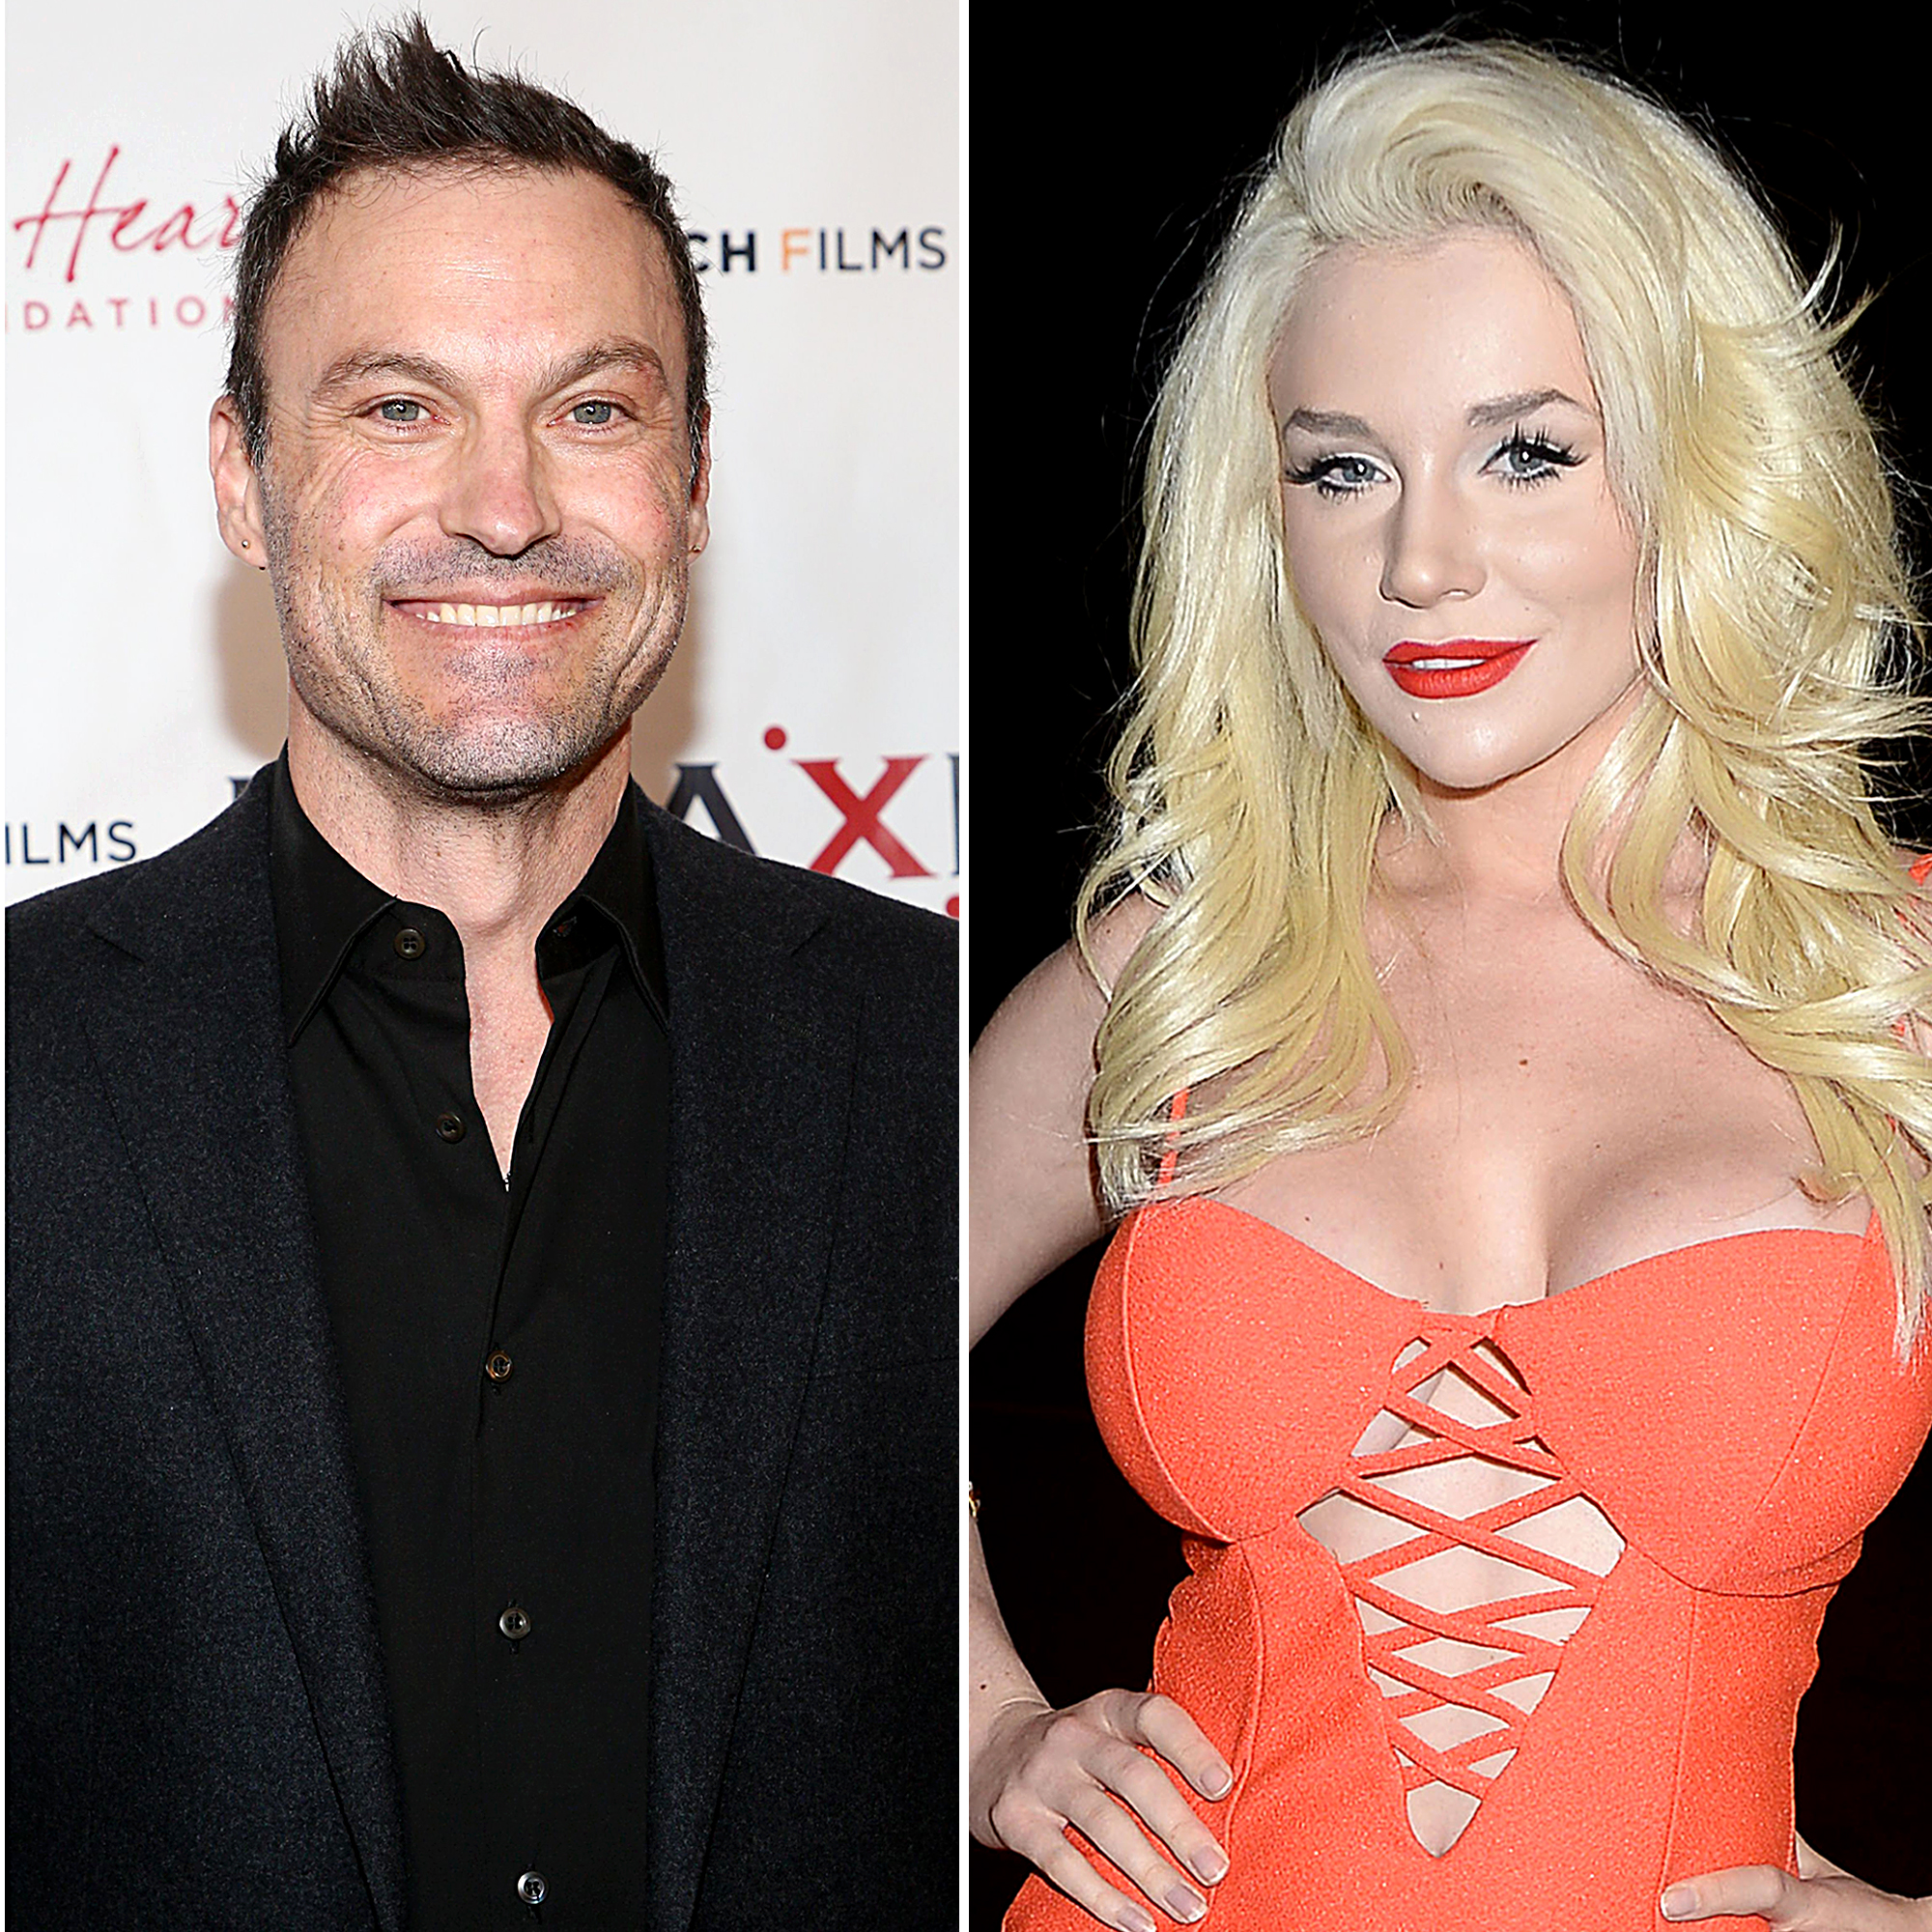 Brian Austin Green and Tina Louise Break Up After Brief Romance